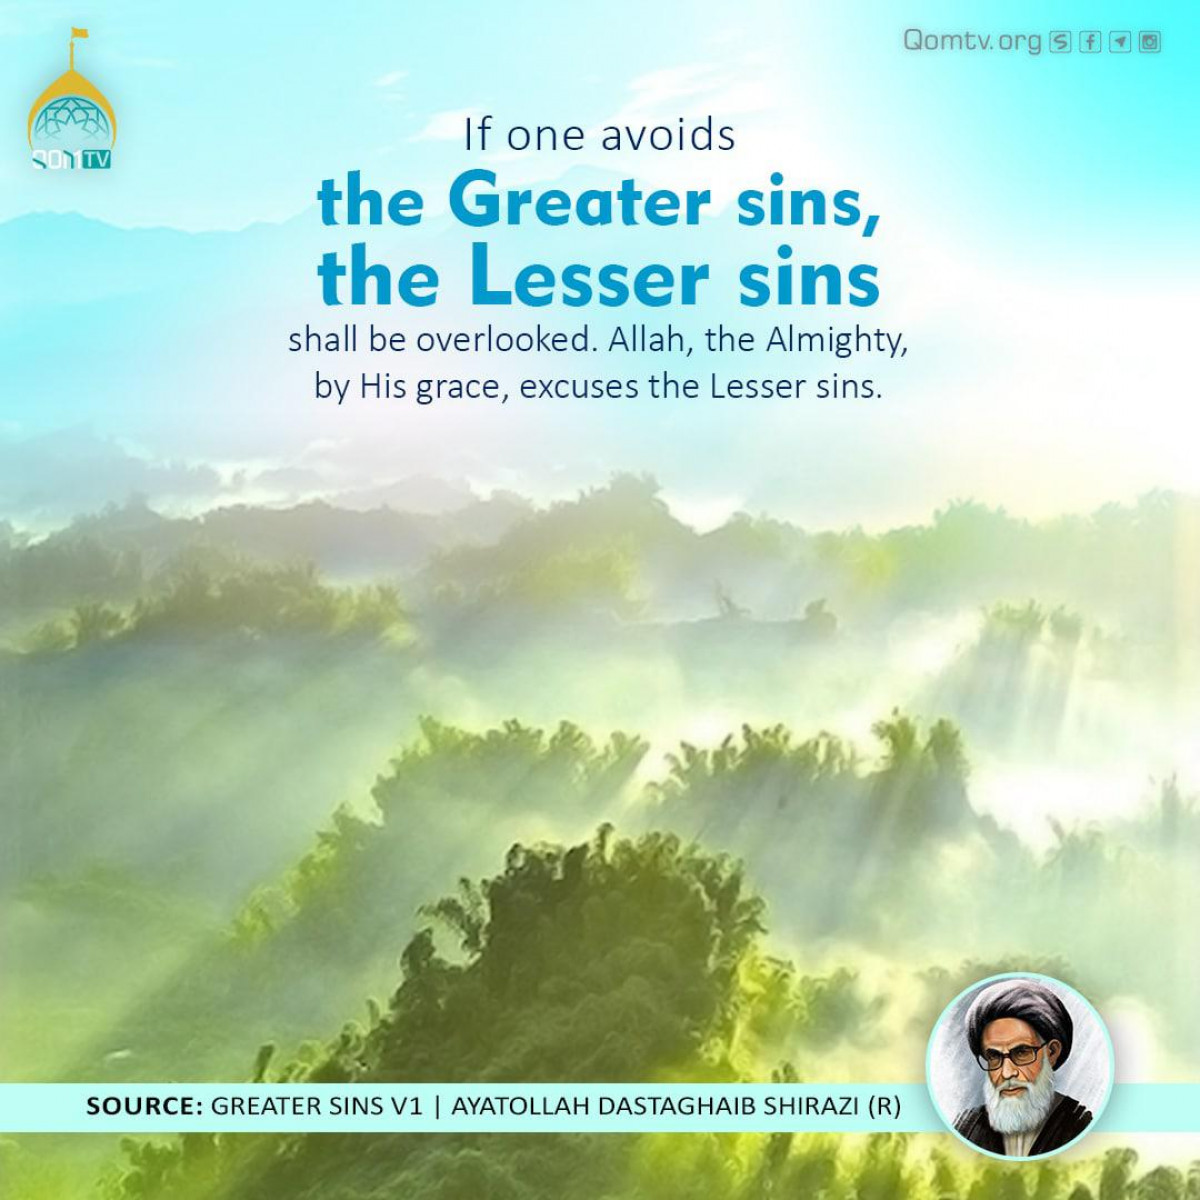 If one avoids the Greater sins, the Lesser sins shall be overlooked